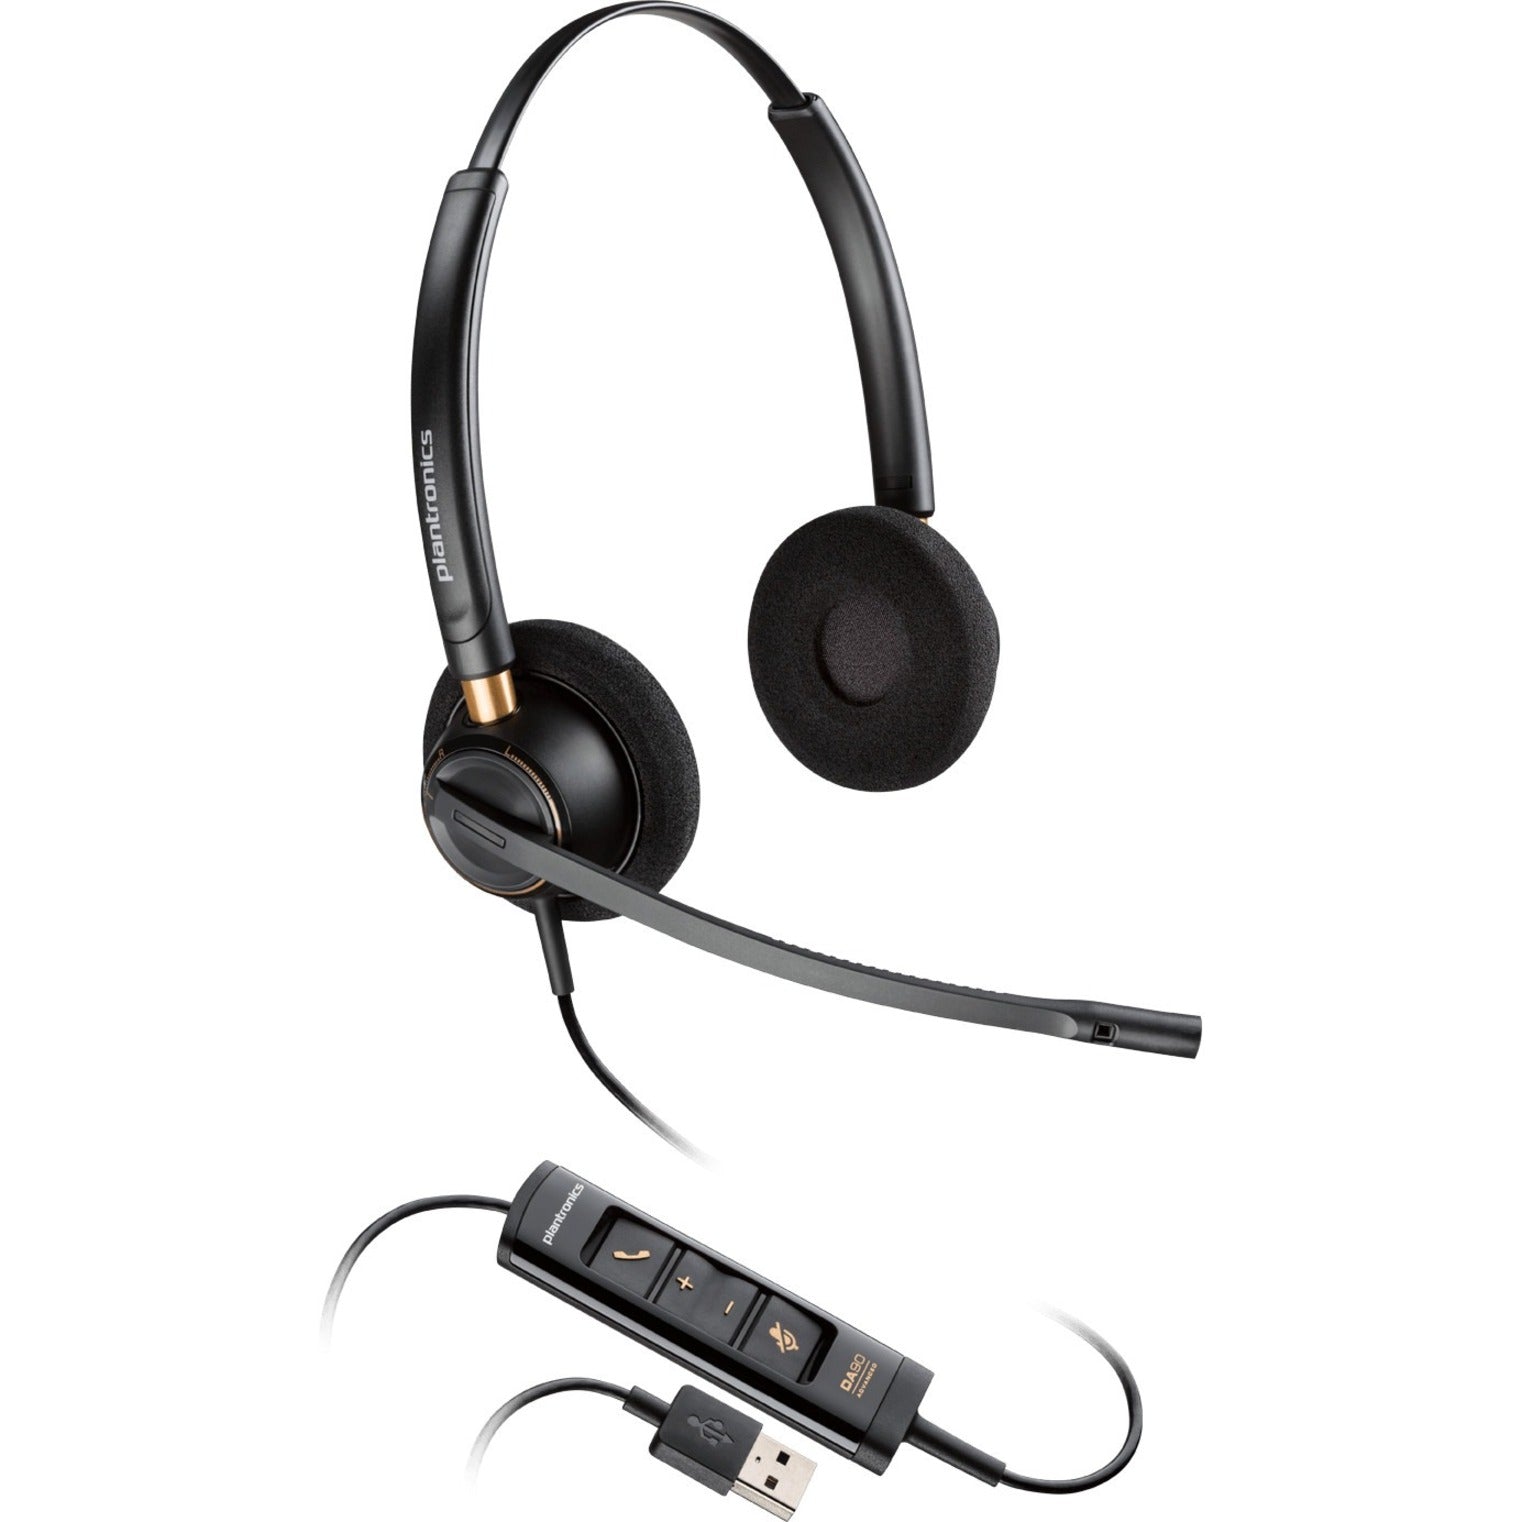 Plantronics 203444-01 Corded Headset with USB Connection, Binaural Over-the-head, Durable, Wideband Audio, Noise Canceling